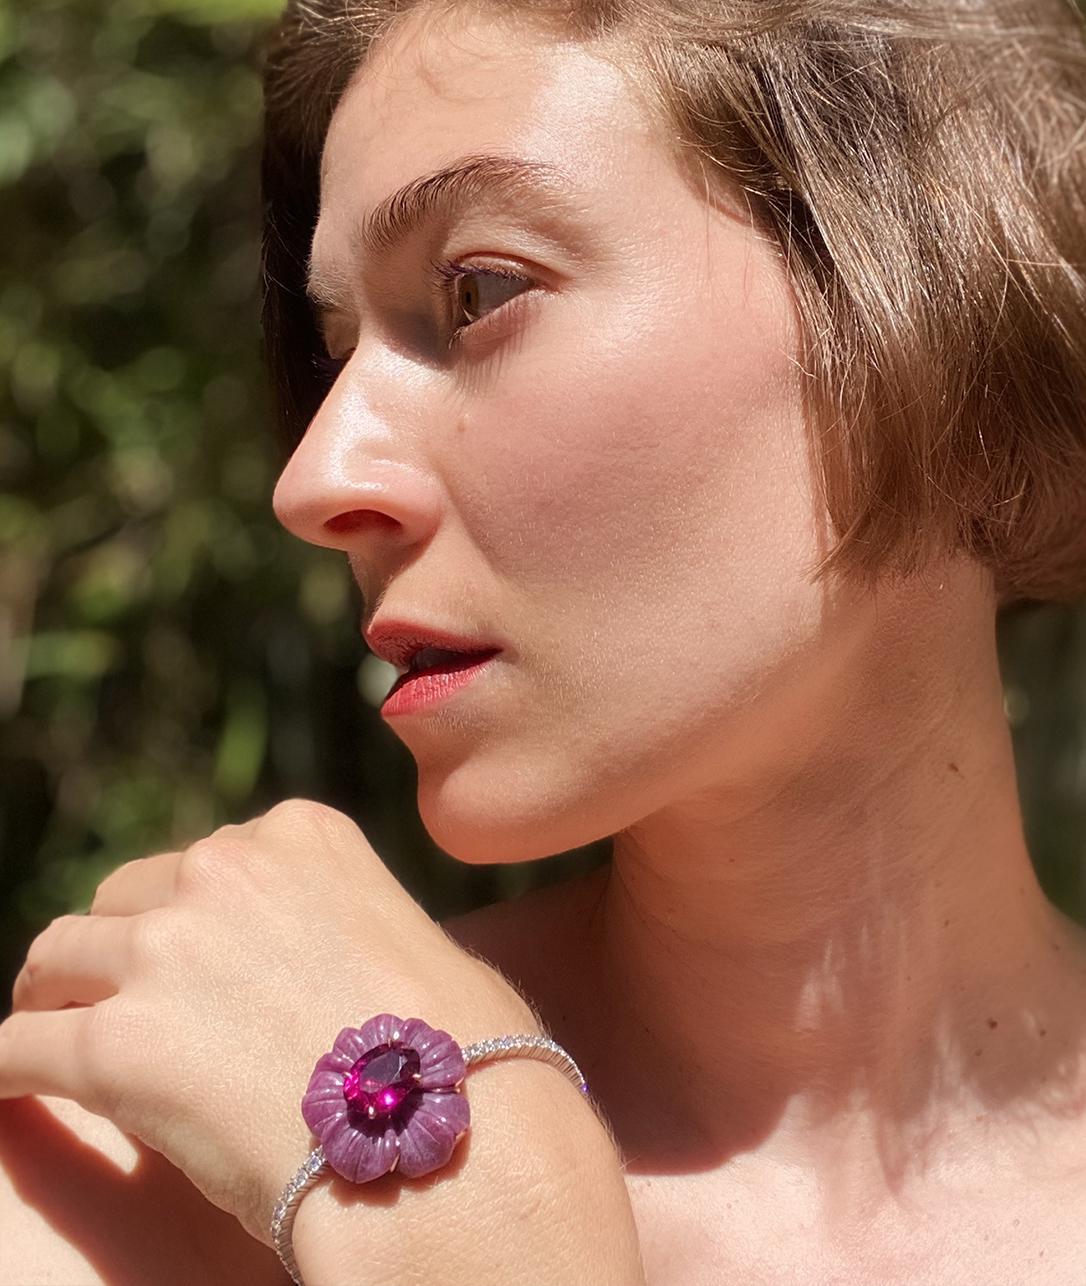 Cherished by cultures around the world, red rubies have been worn to attract love and luck and repel negative energies and illness. Their lit-from-within quality has captivated people since antiquity.